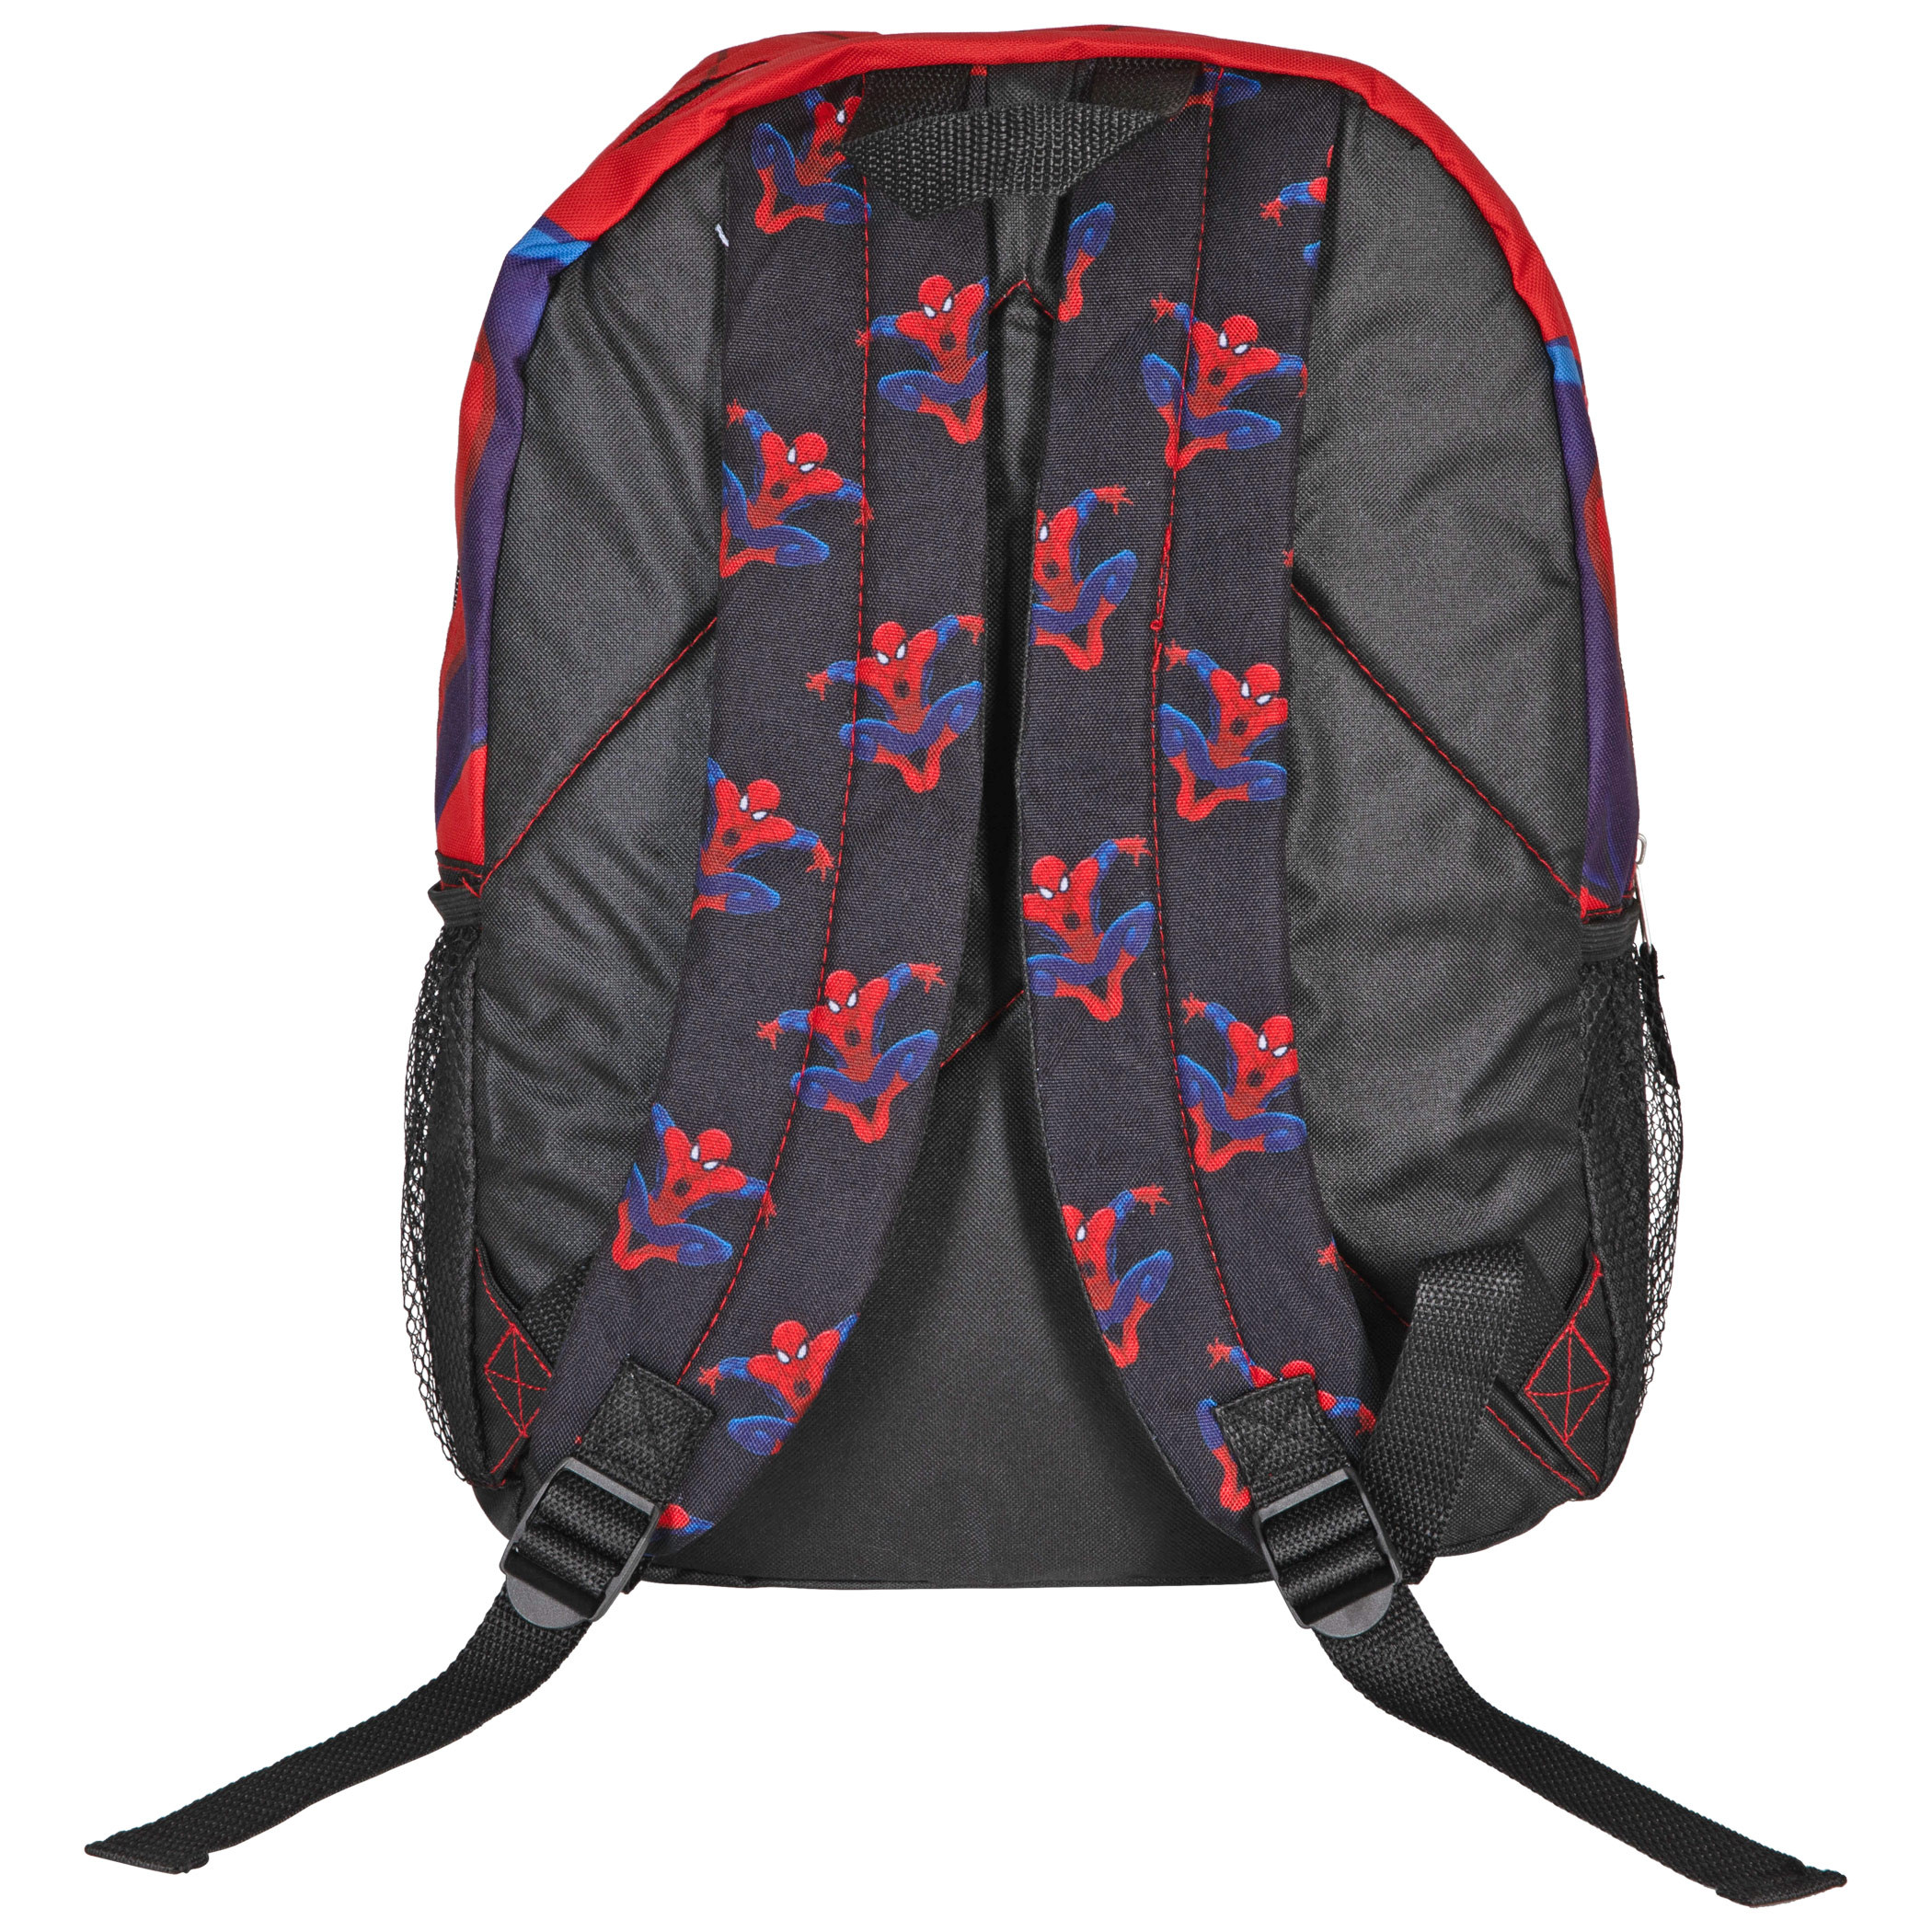 Spider-Man Suit 16" Padded Backpack